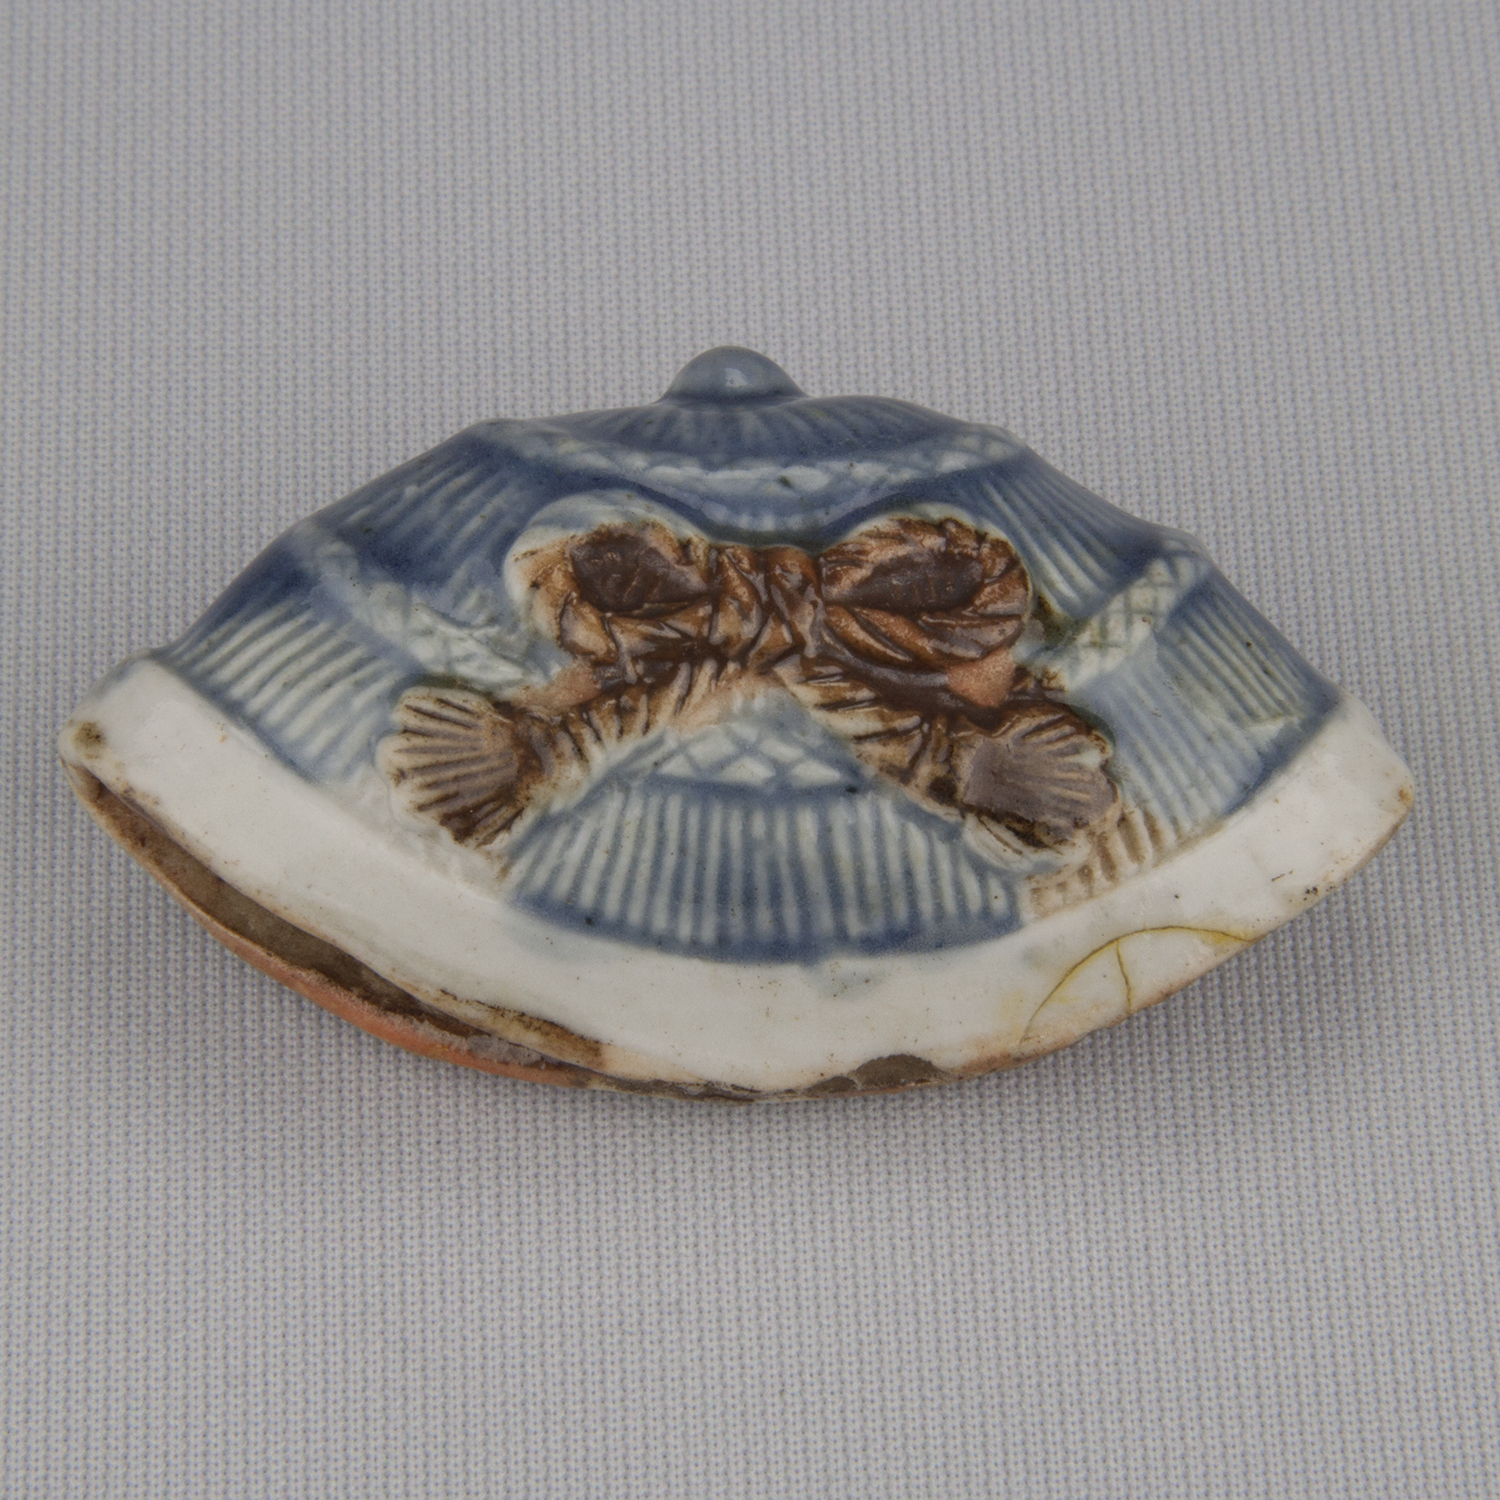 Netsuke depicting a hat, ca. 18th–19th century, porcelain with blue, white and brown glaze, The Herman D. Doochin Collection, 1992.161